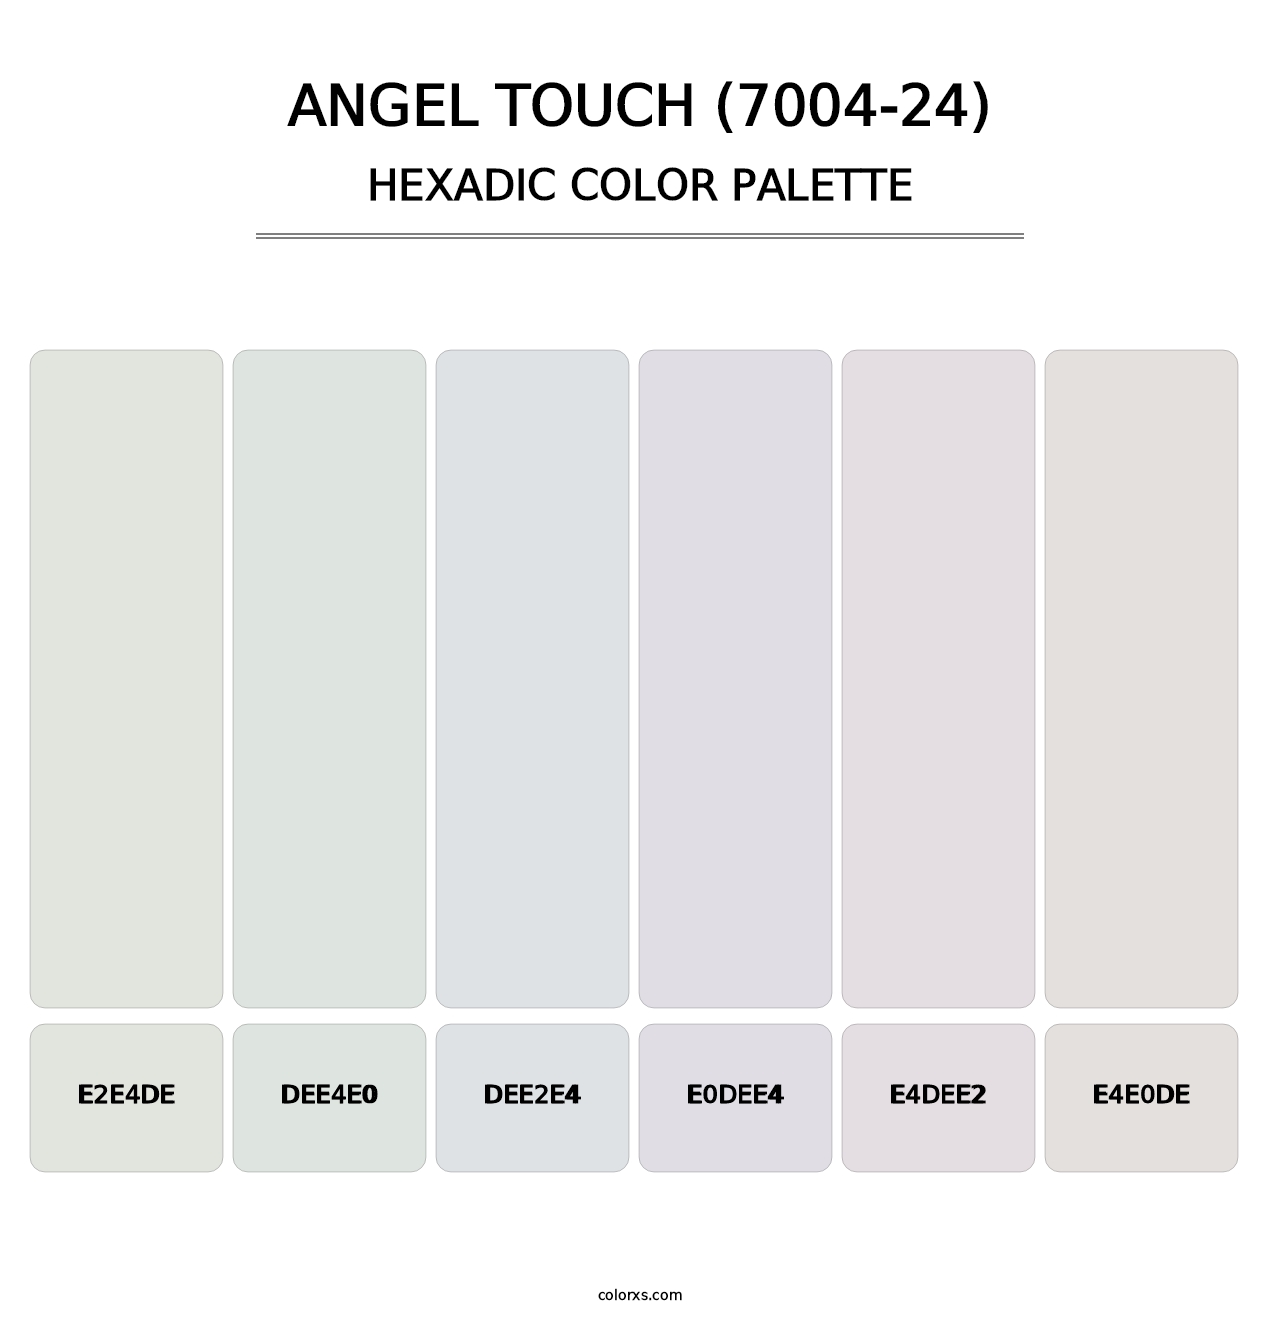 Angel Touch (7004-24) - Hexadic Color Palette